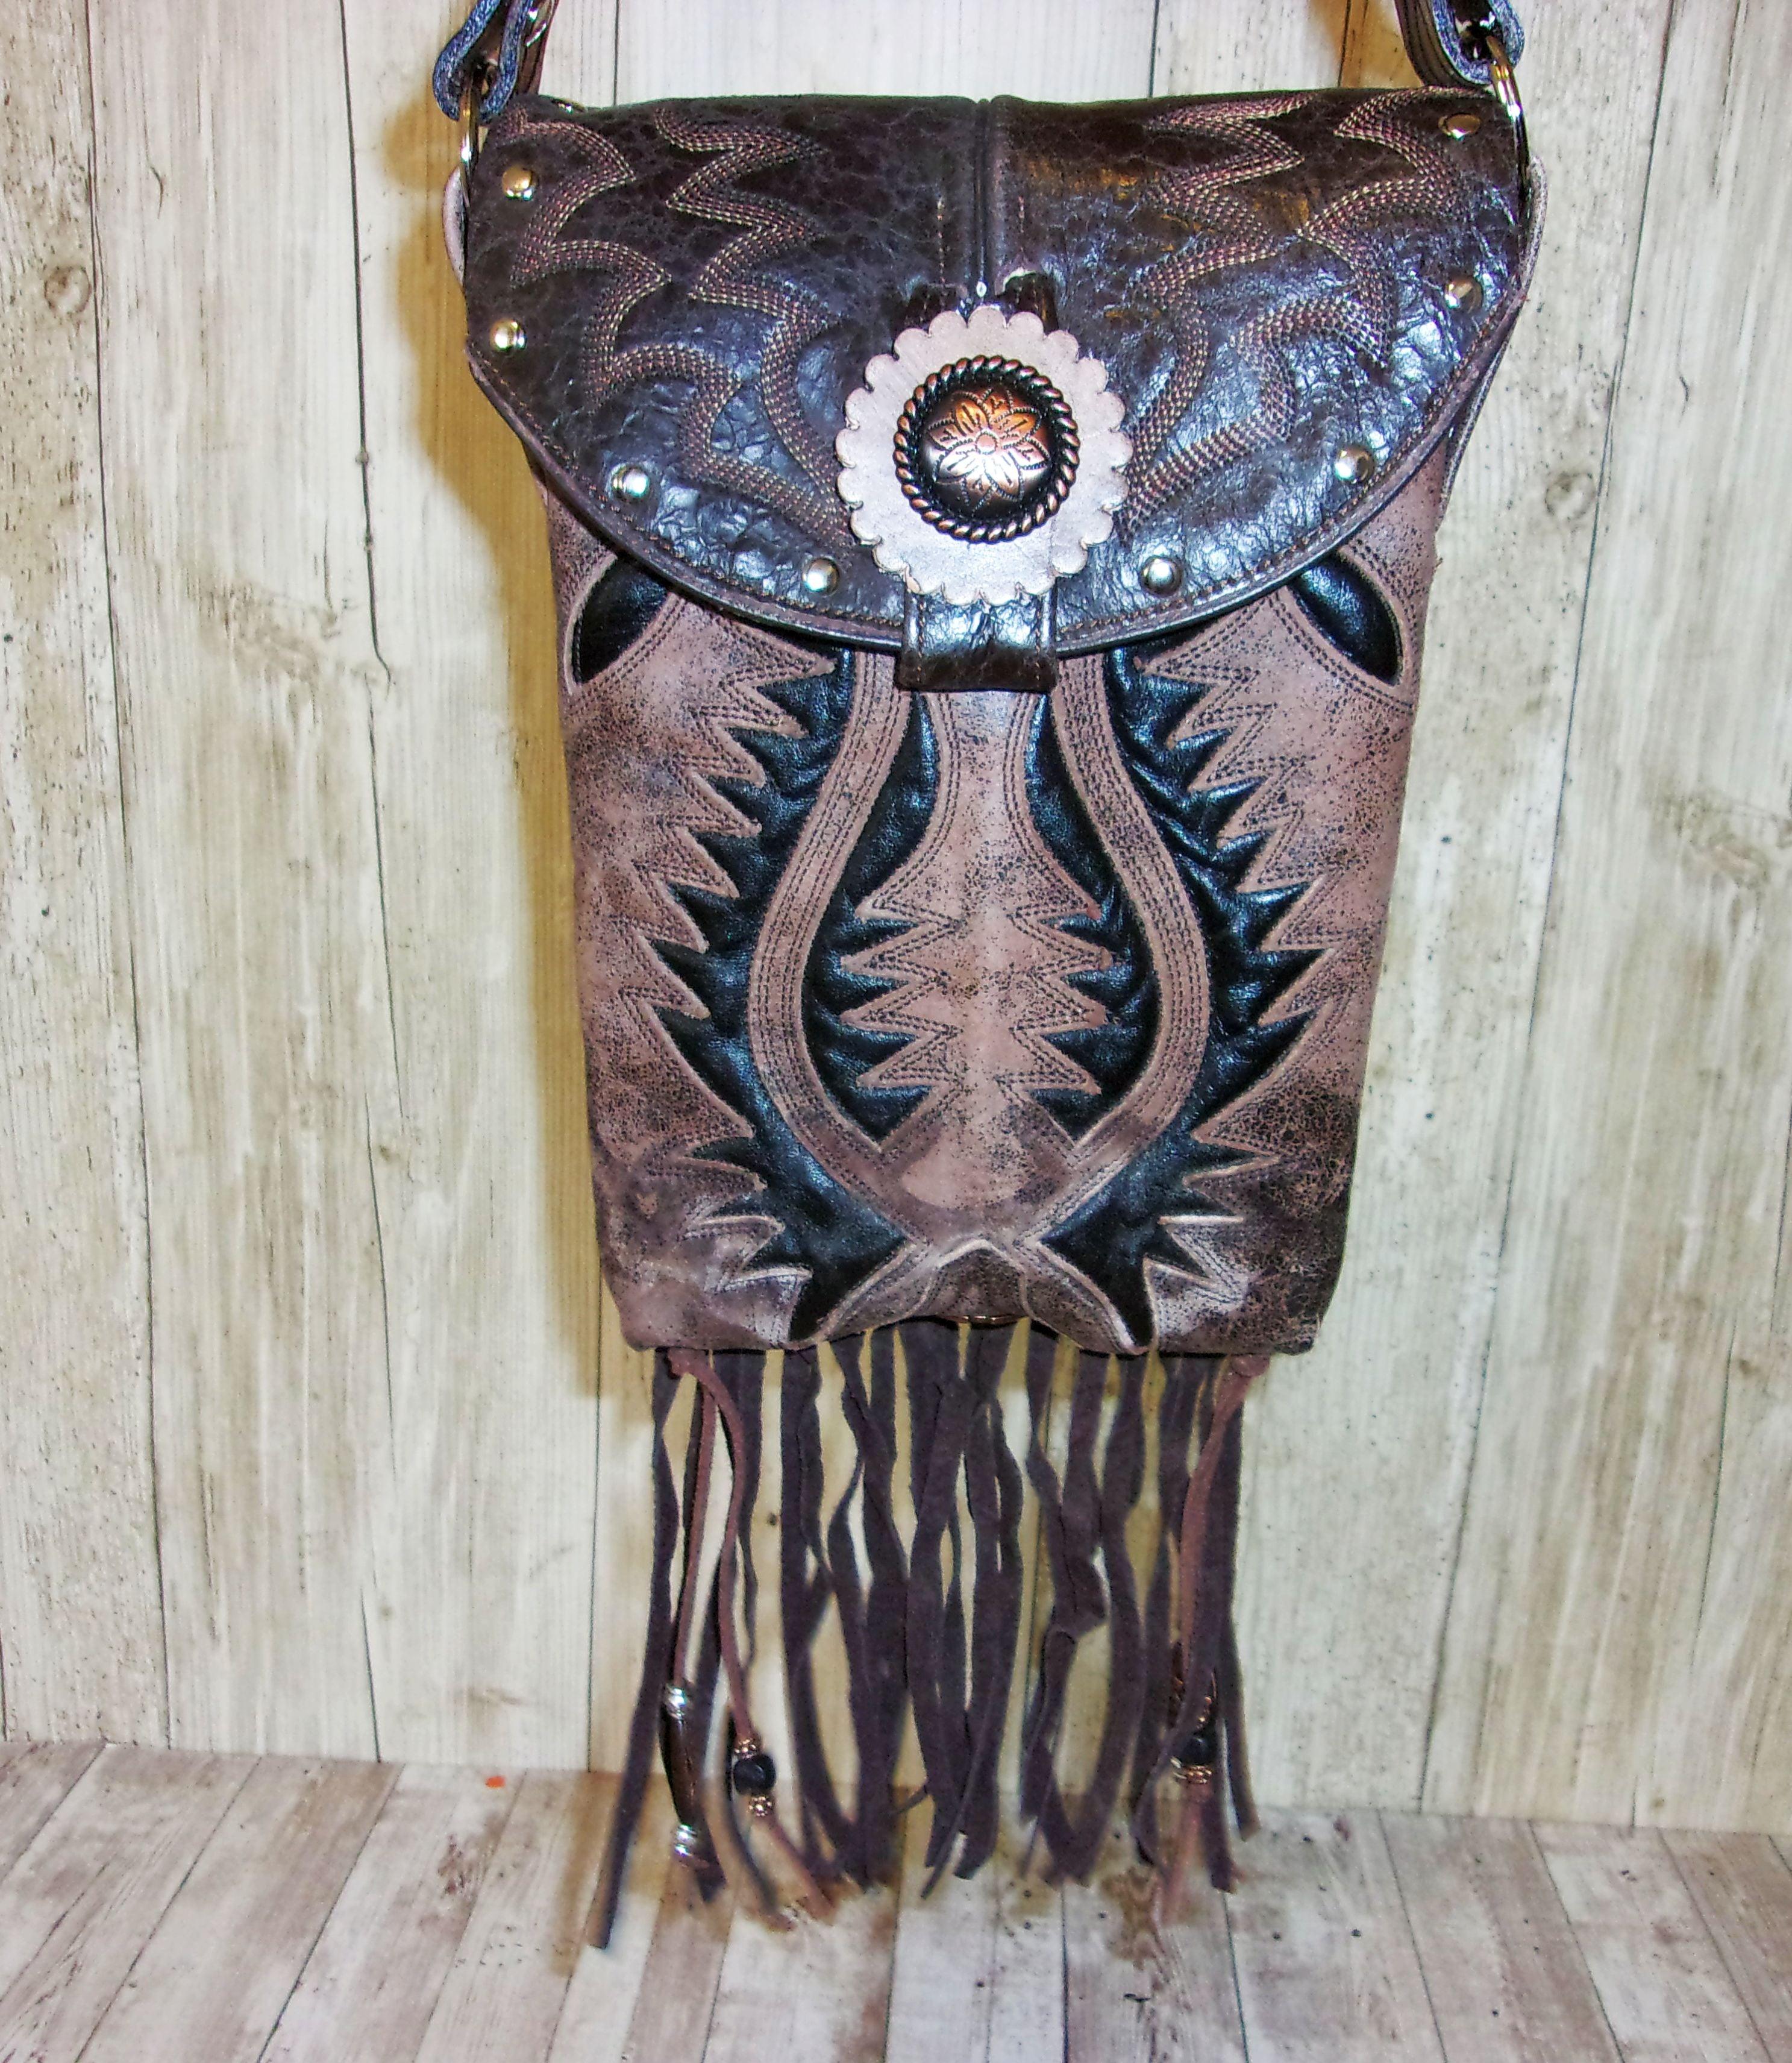 Concealed Carry Purse with Fringe - Cowboy Boot Purse - Crossbody Conceal Carry Purse CB110 cowboy boot purses, western fringe purse, handmade leather purses, boot purse, handmade western purse, custom leather handbags Chris Thompson Bags